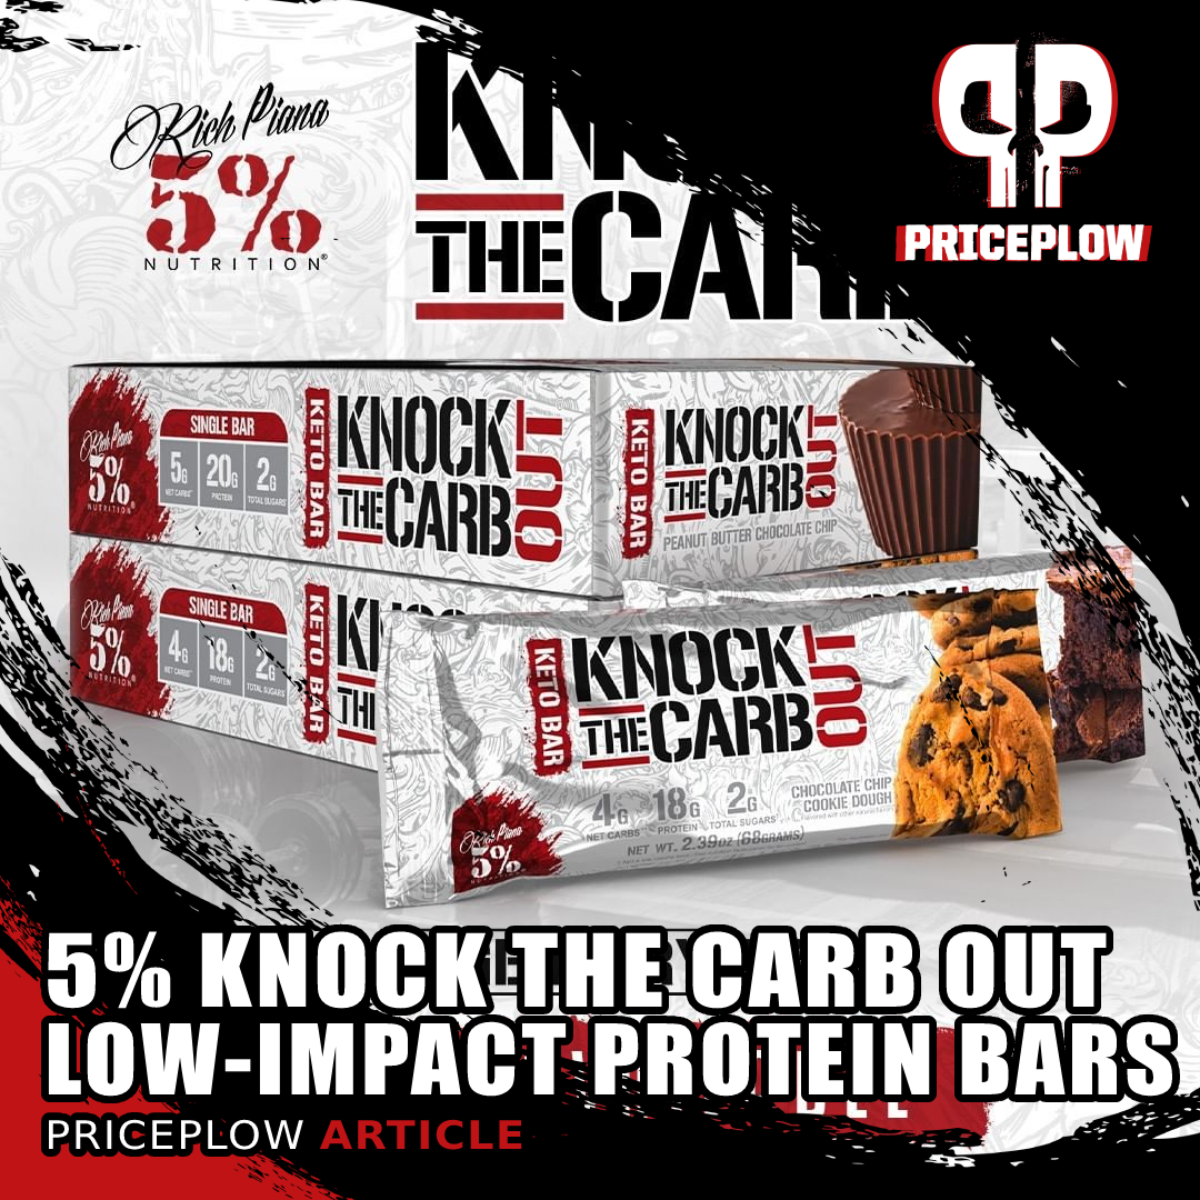 5% NUTRITION KNOCK THE CARB OUT BARS rich piana keto protein ktco 10-PACK BOX 